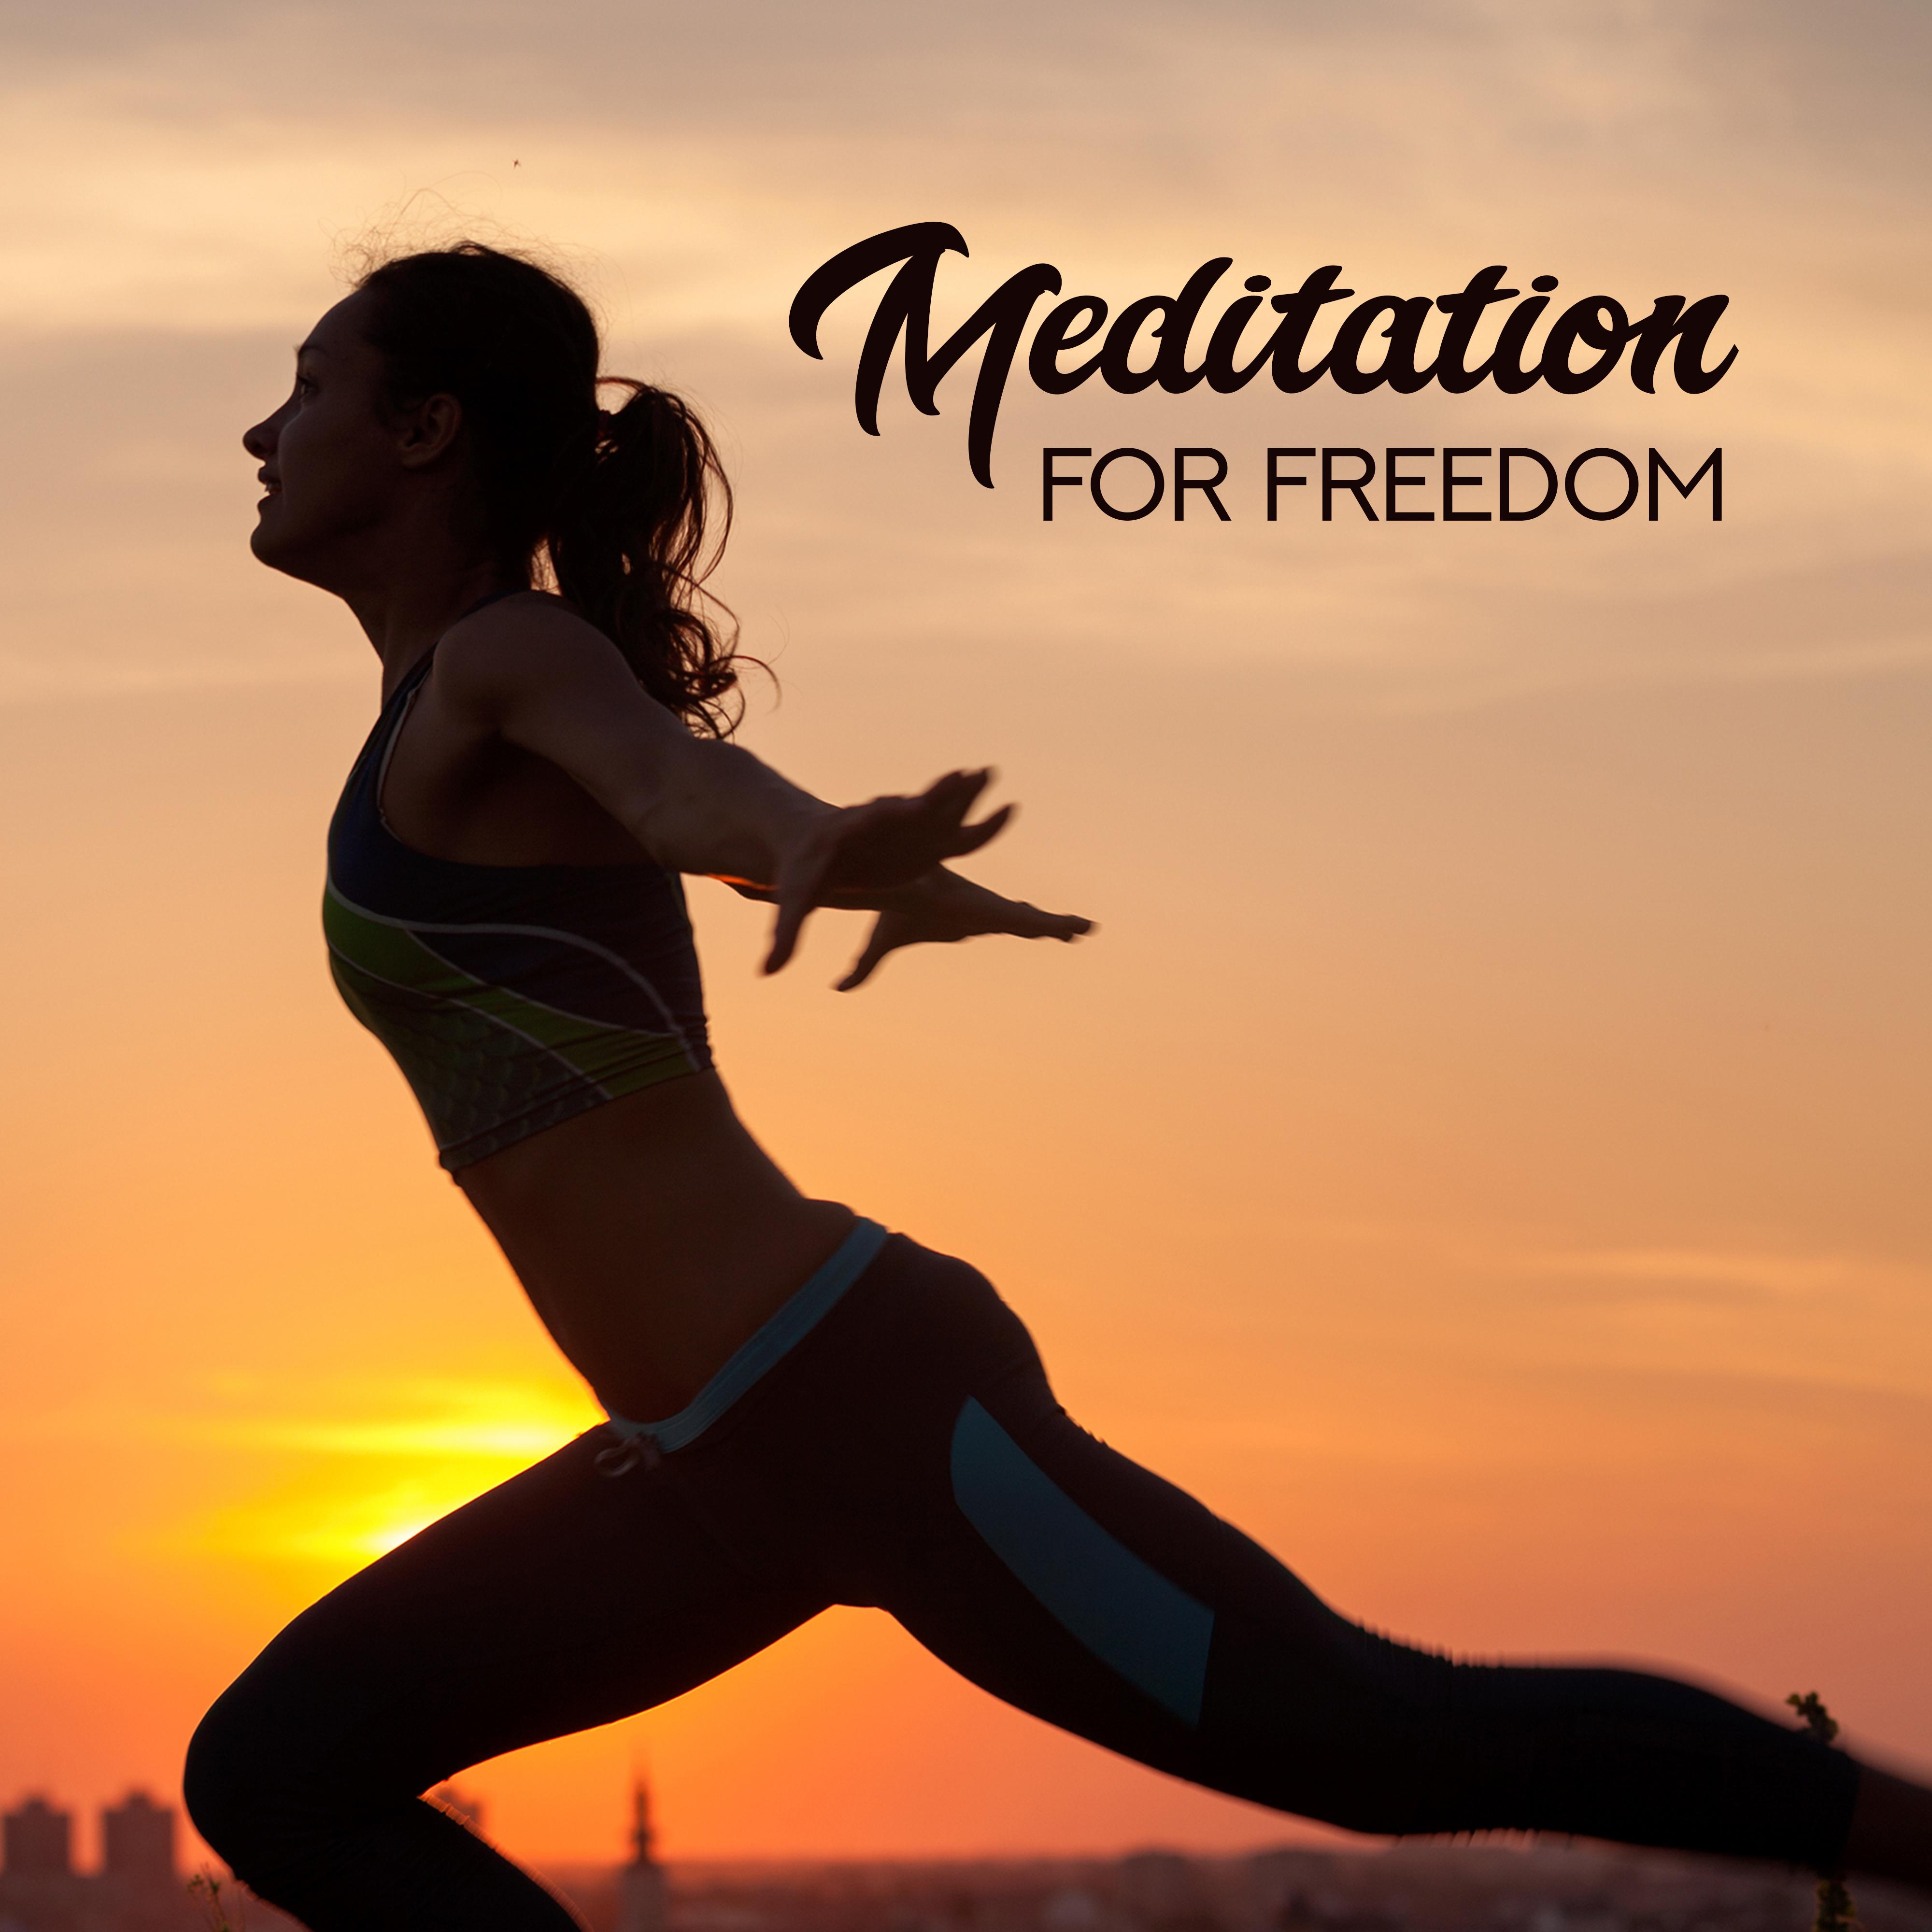 Meditation for Freedom – New Age Music for Relaxation, Yoga, Pure Meditation, Asian Relaxation, Zen Serenity, Meditation Music Zone, Ambient Yoga